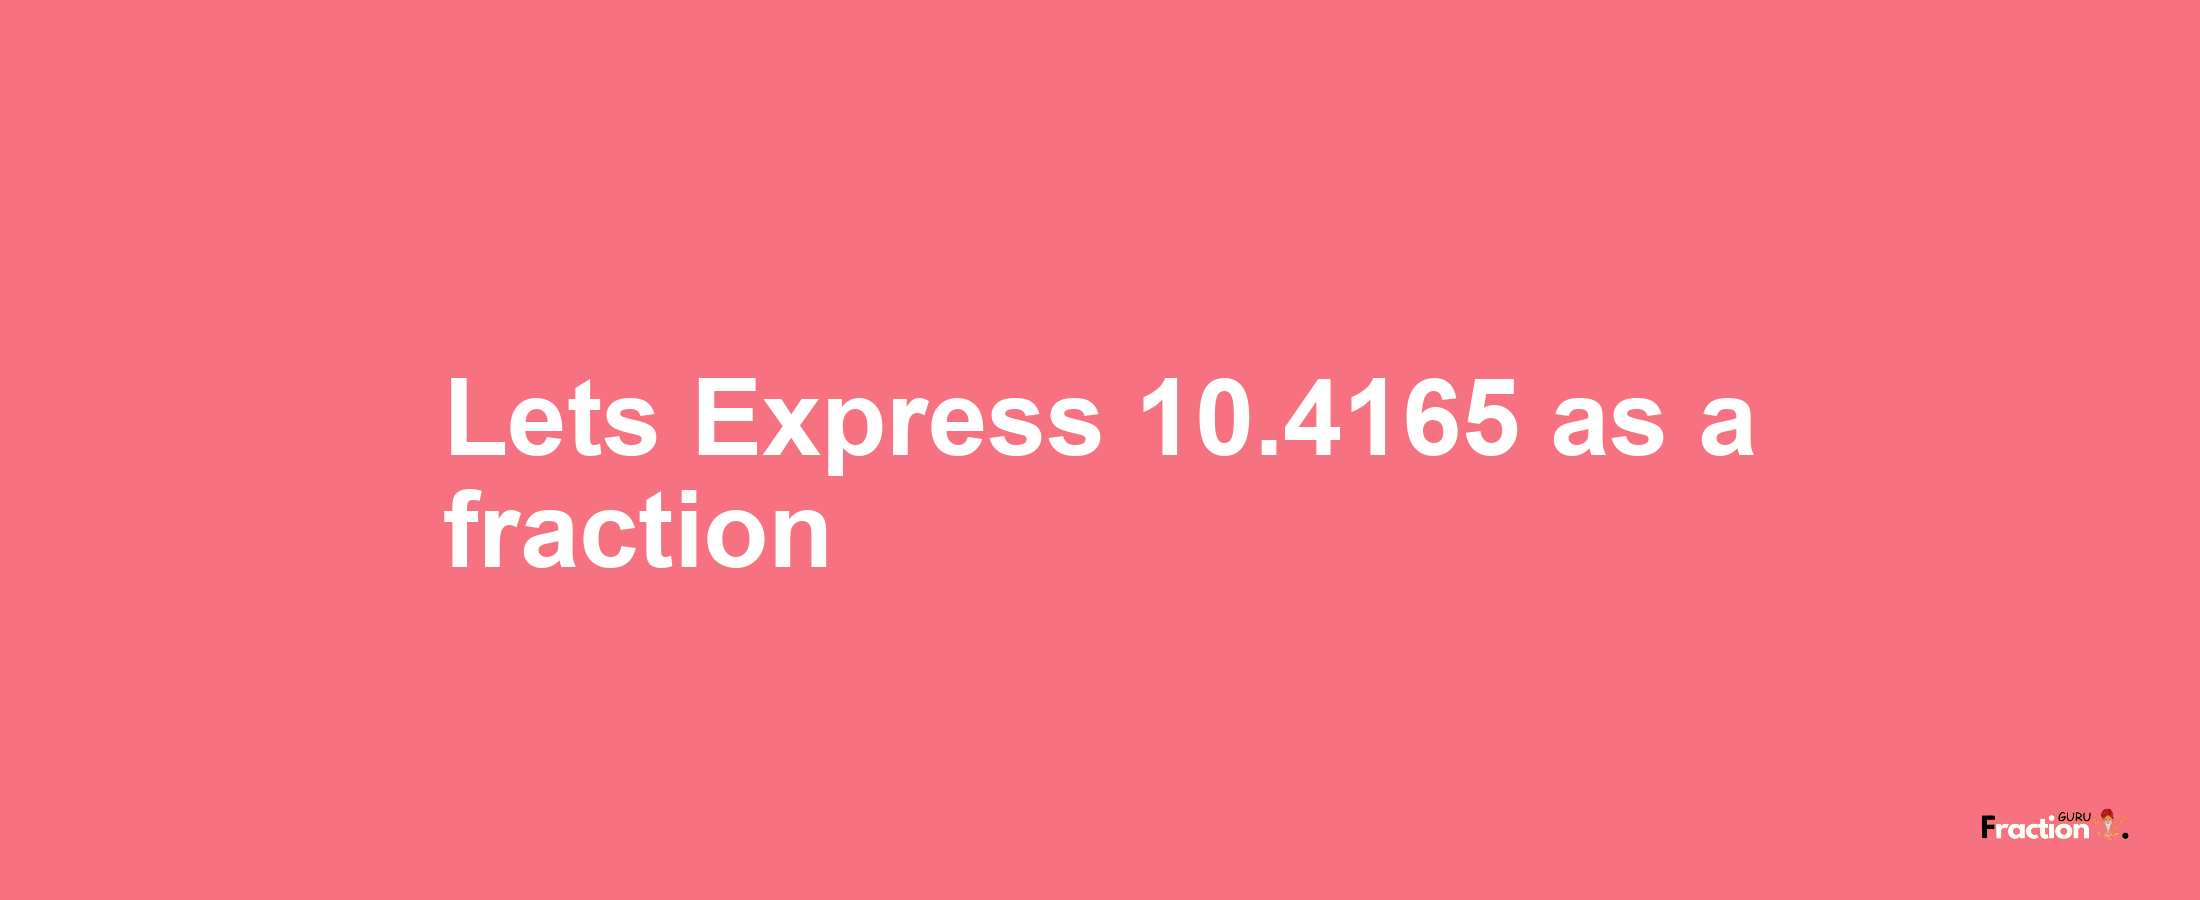 Lets Express 10.4165 as afraction